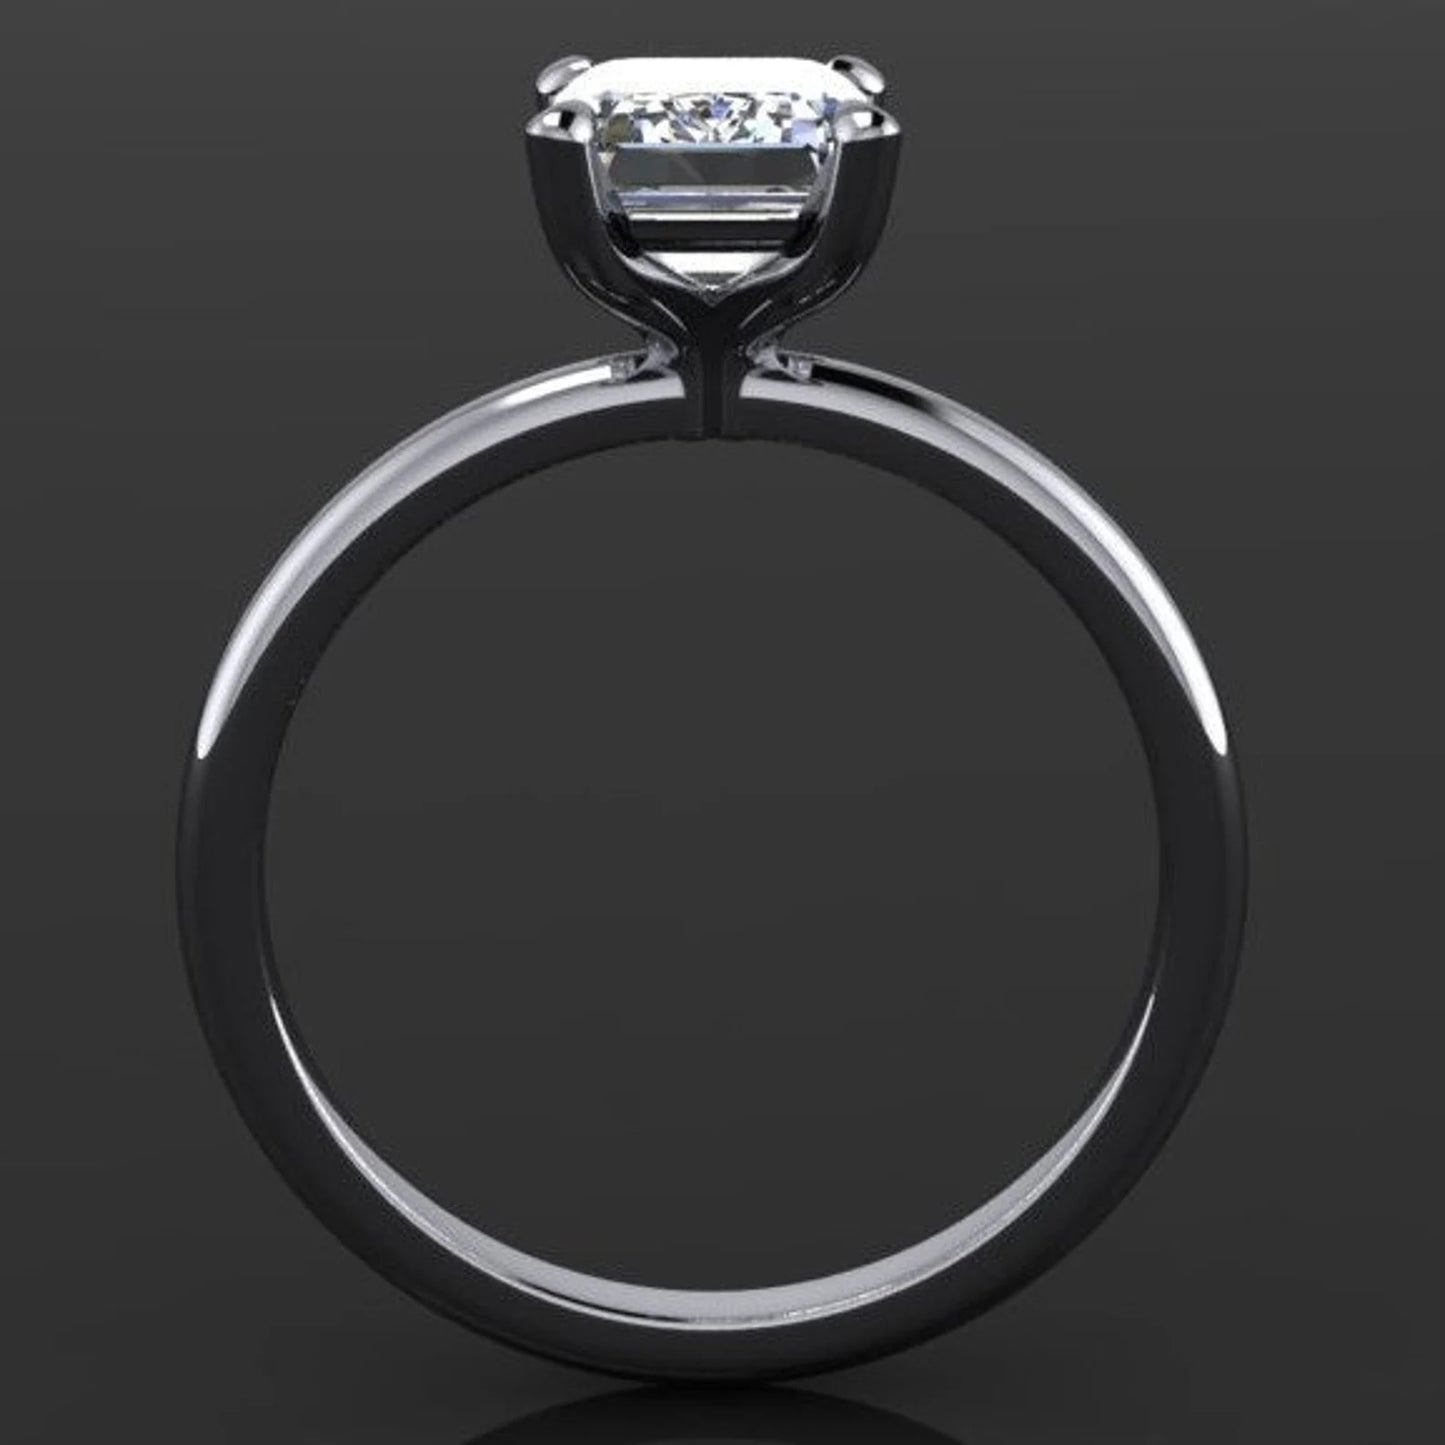 Giant Engagement Ring Too Big for Ring Case. Black Background Stock Image -  Image of jewelry, bold: 1862225